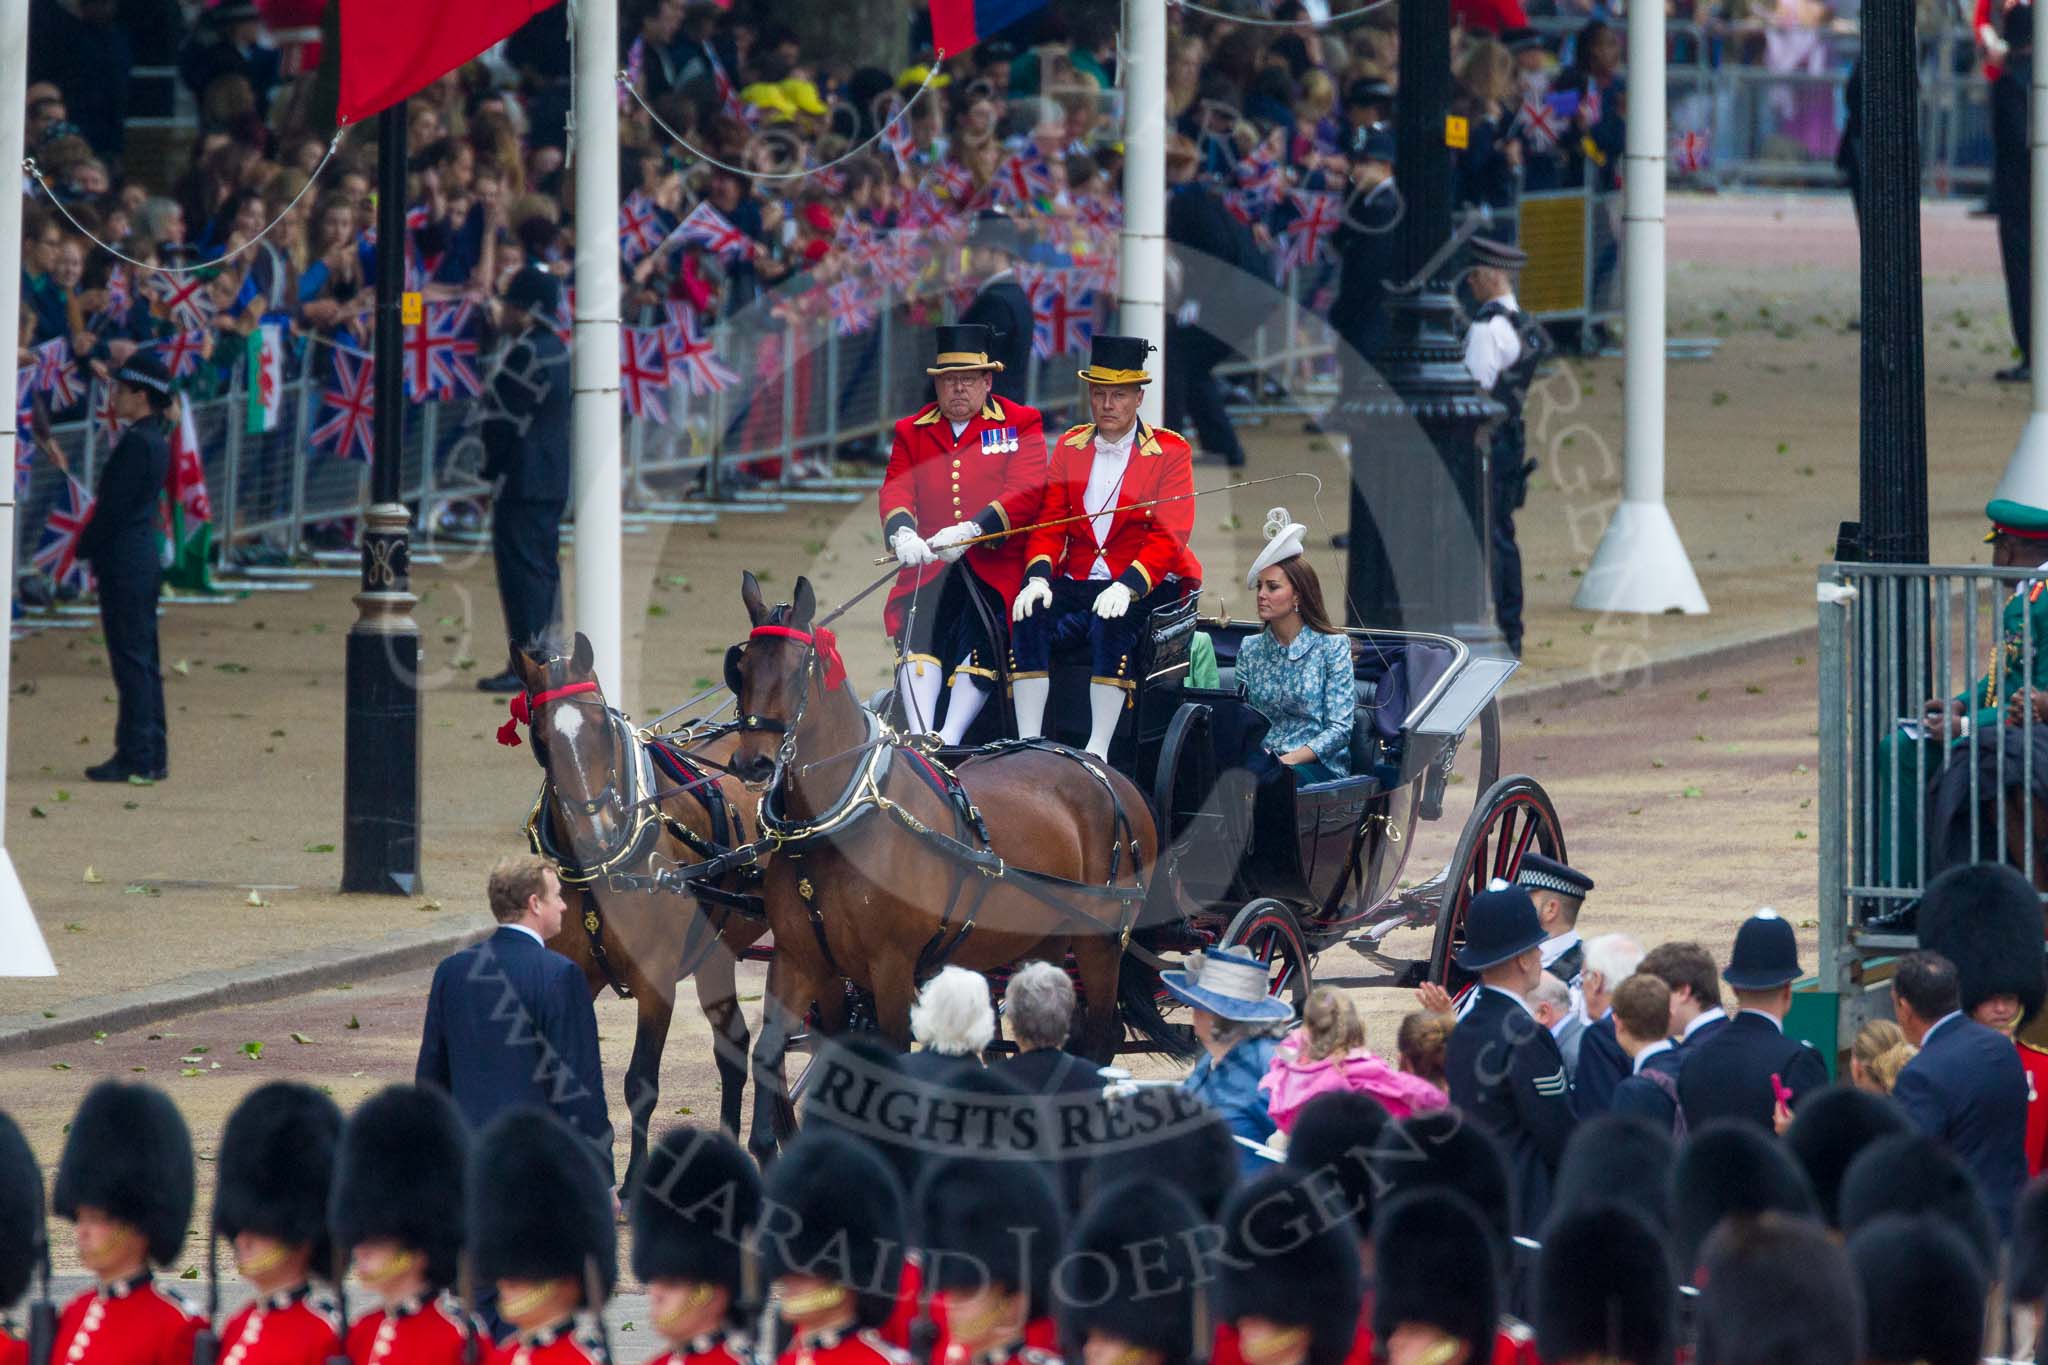 Trooping the Colour 2015. Image #174, 13 June 2015 10:49 Horse Guards Parade, London, UK